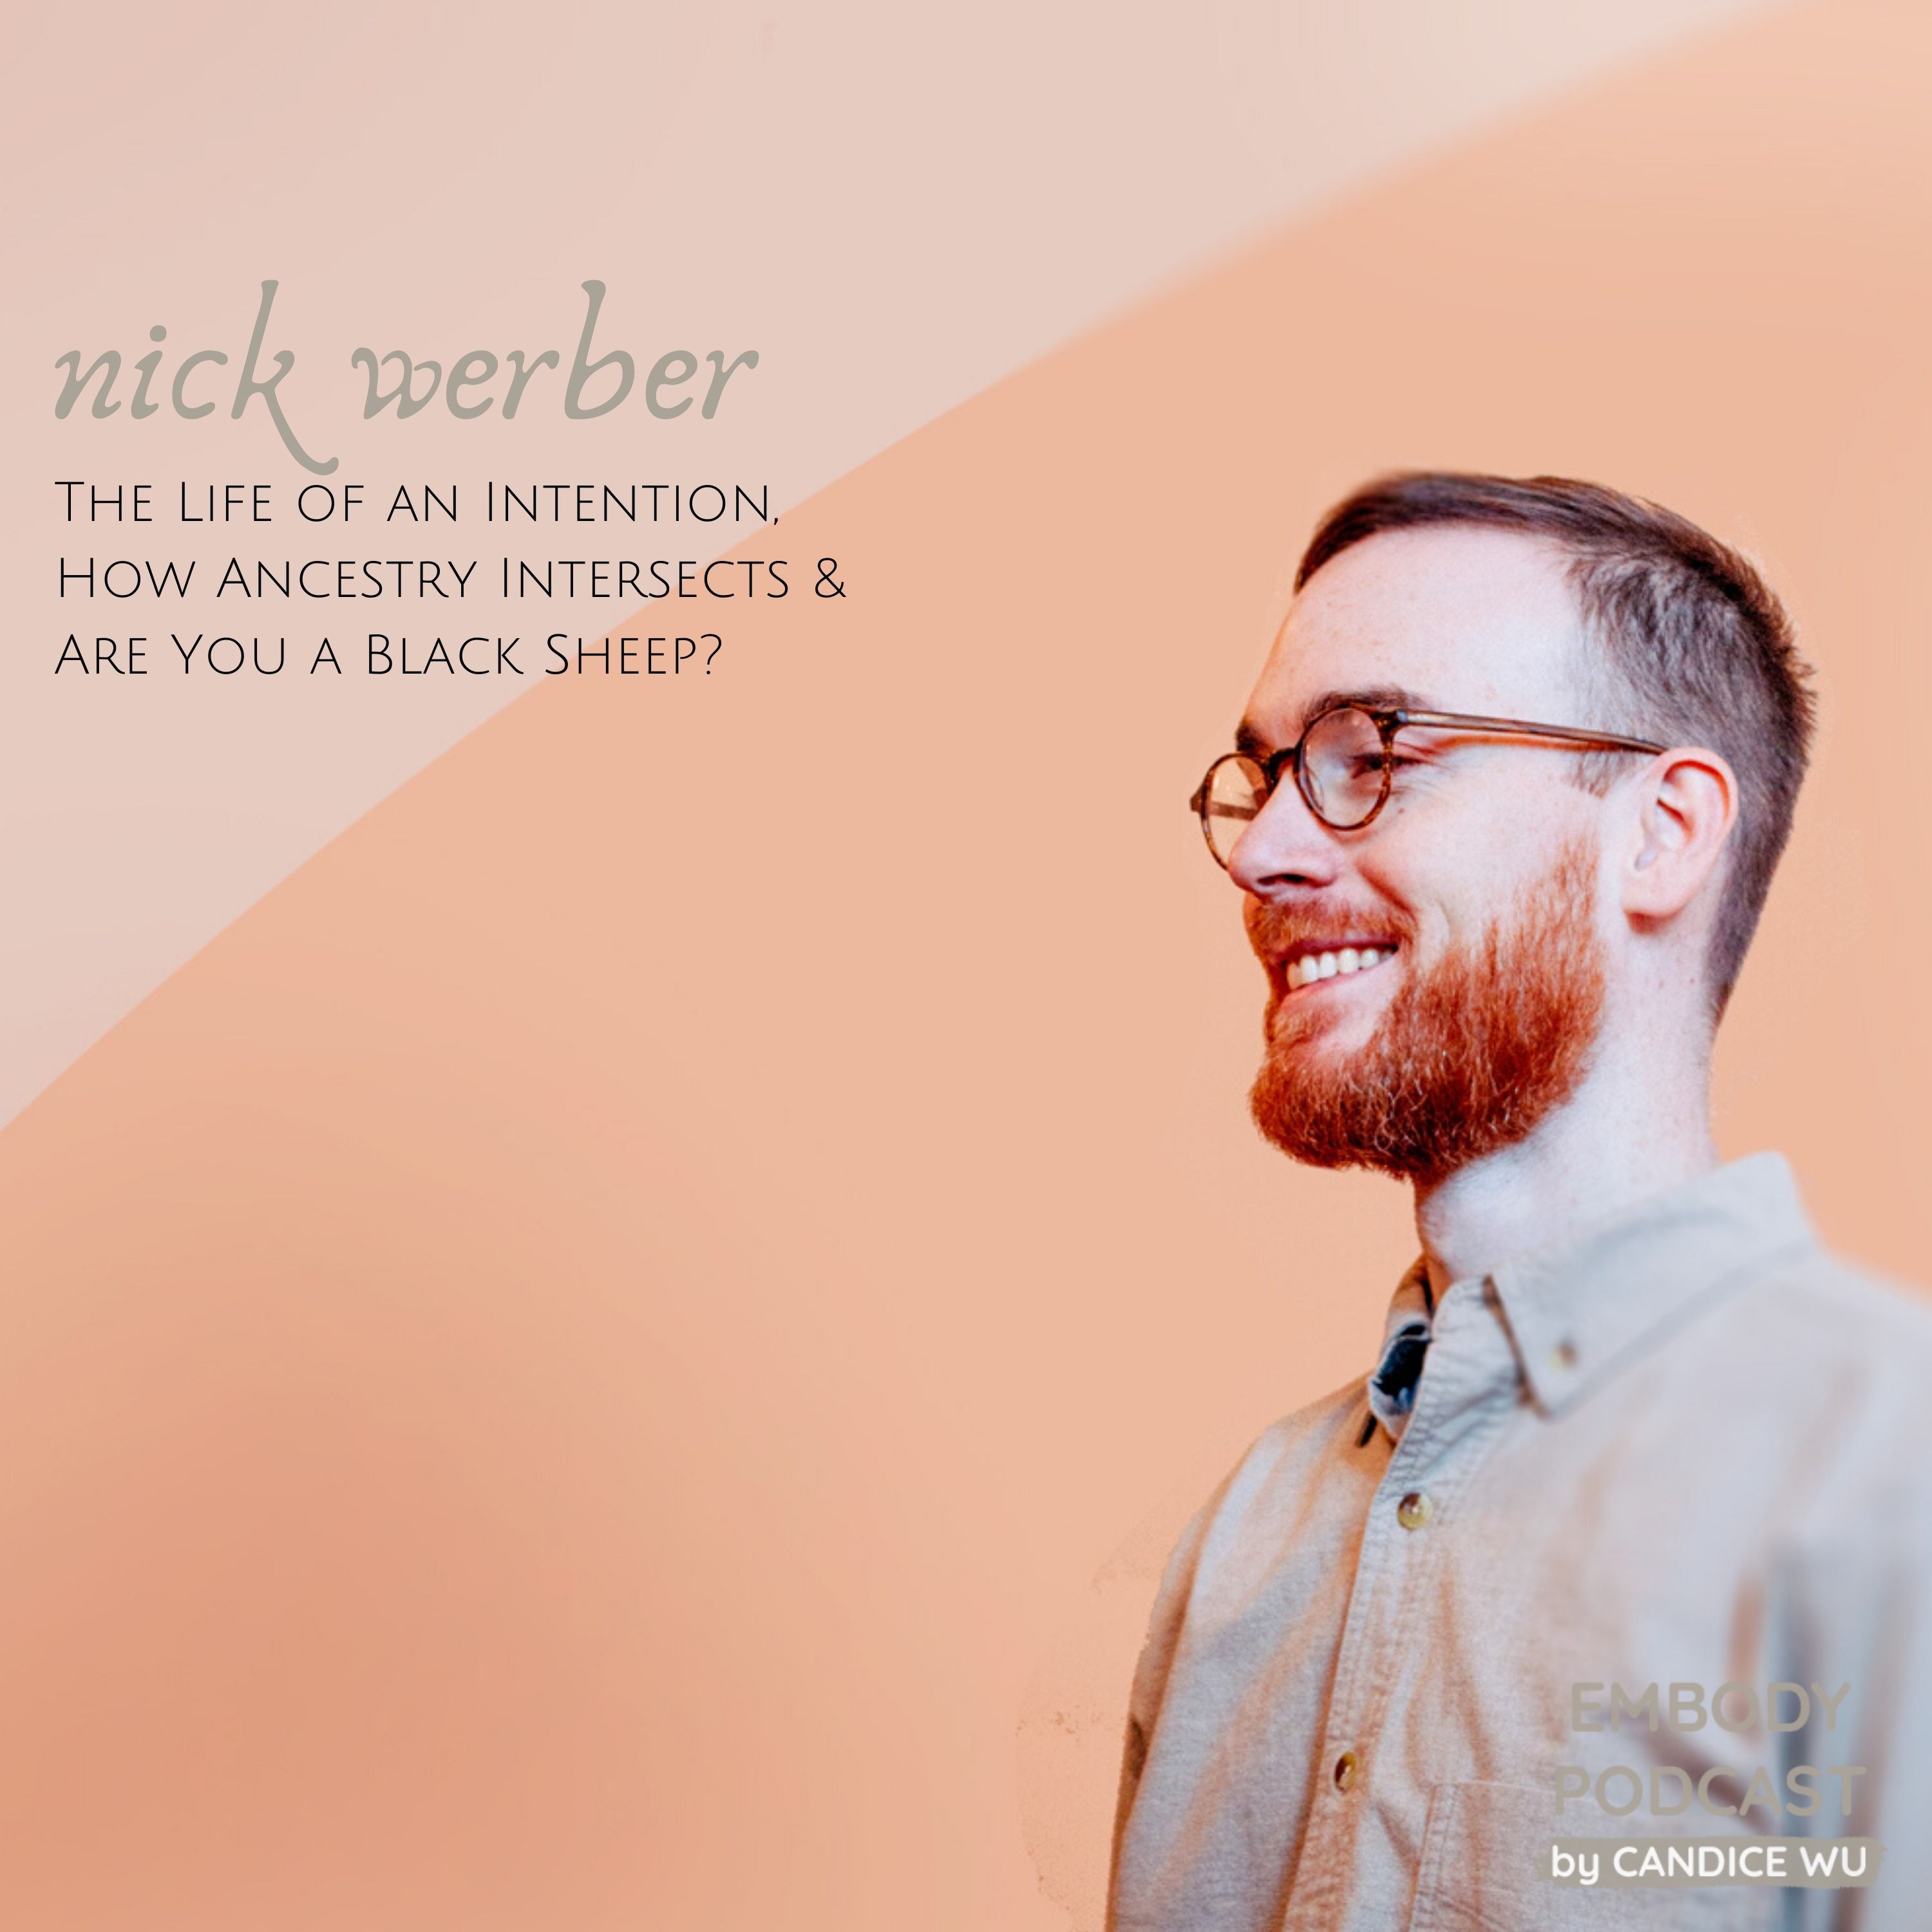 106: The Life of an Intention, How Ancestry Intersects, and Black Sheep With Nick Werber